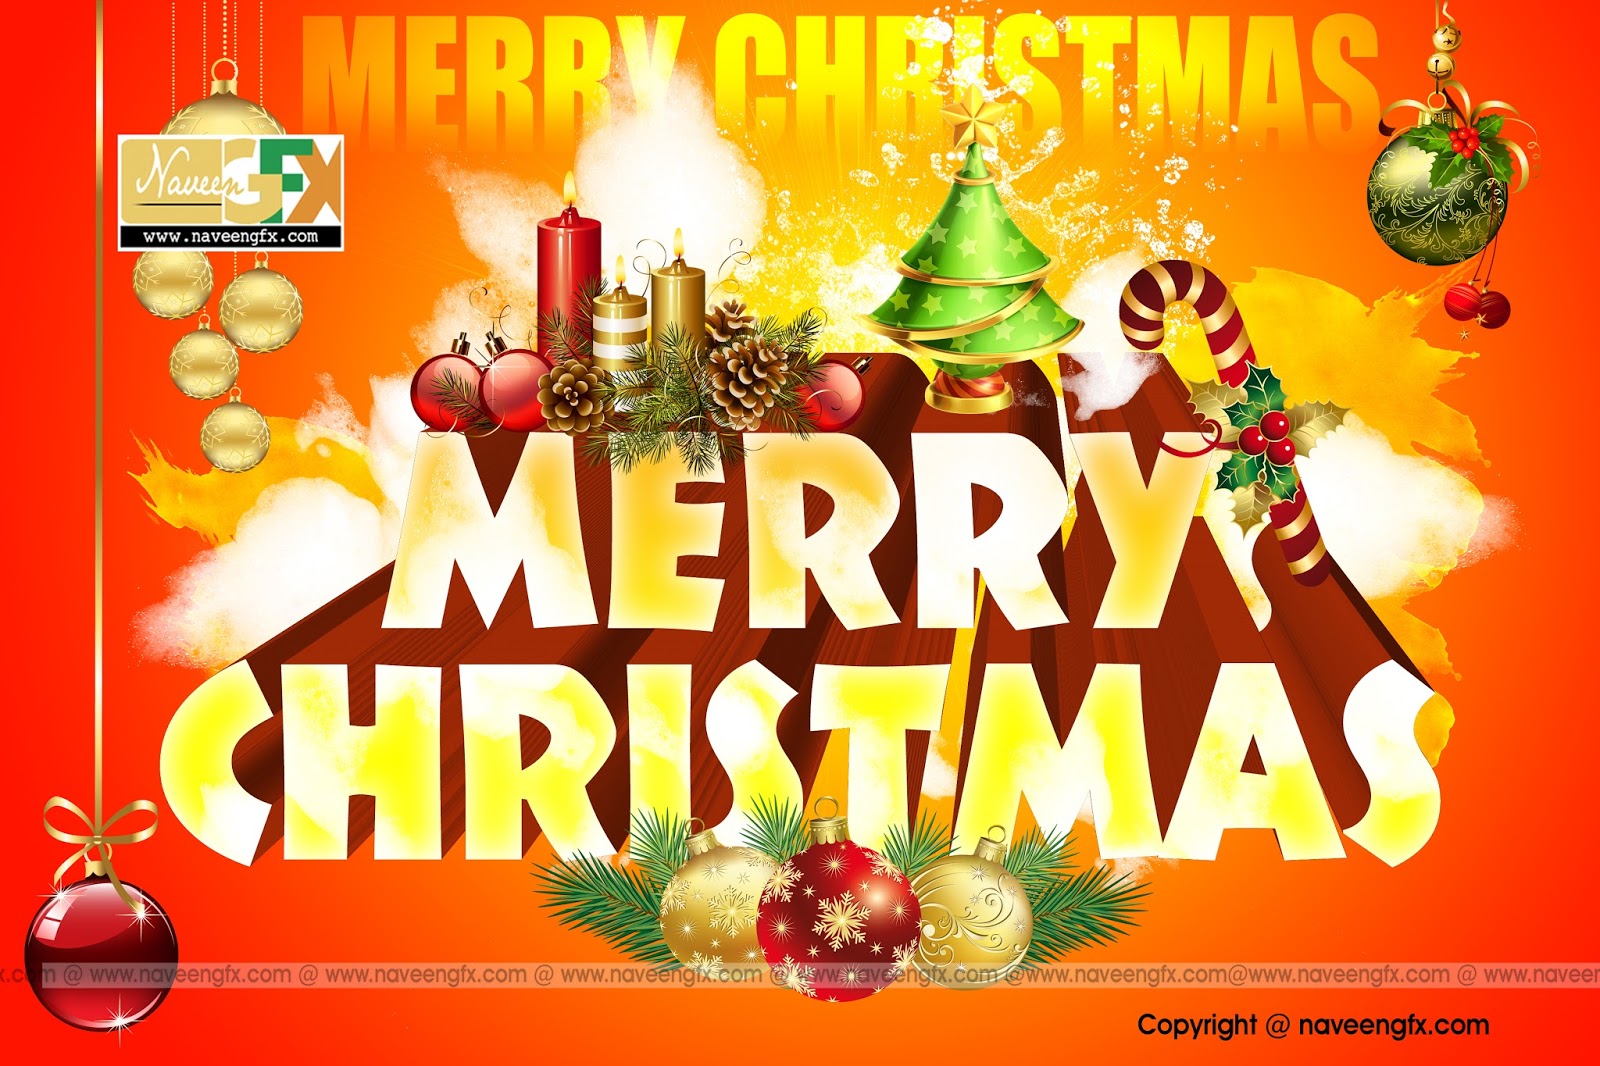 merry christmas photo cards psd template free online | naveengfx